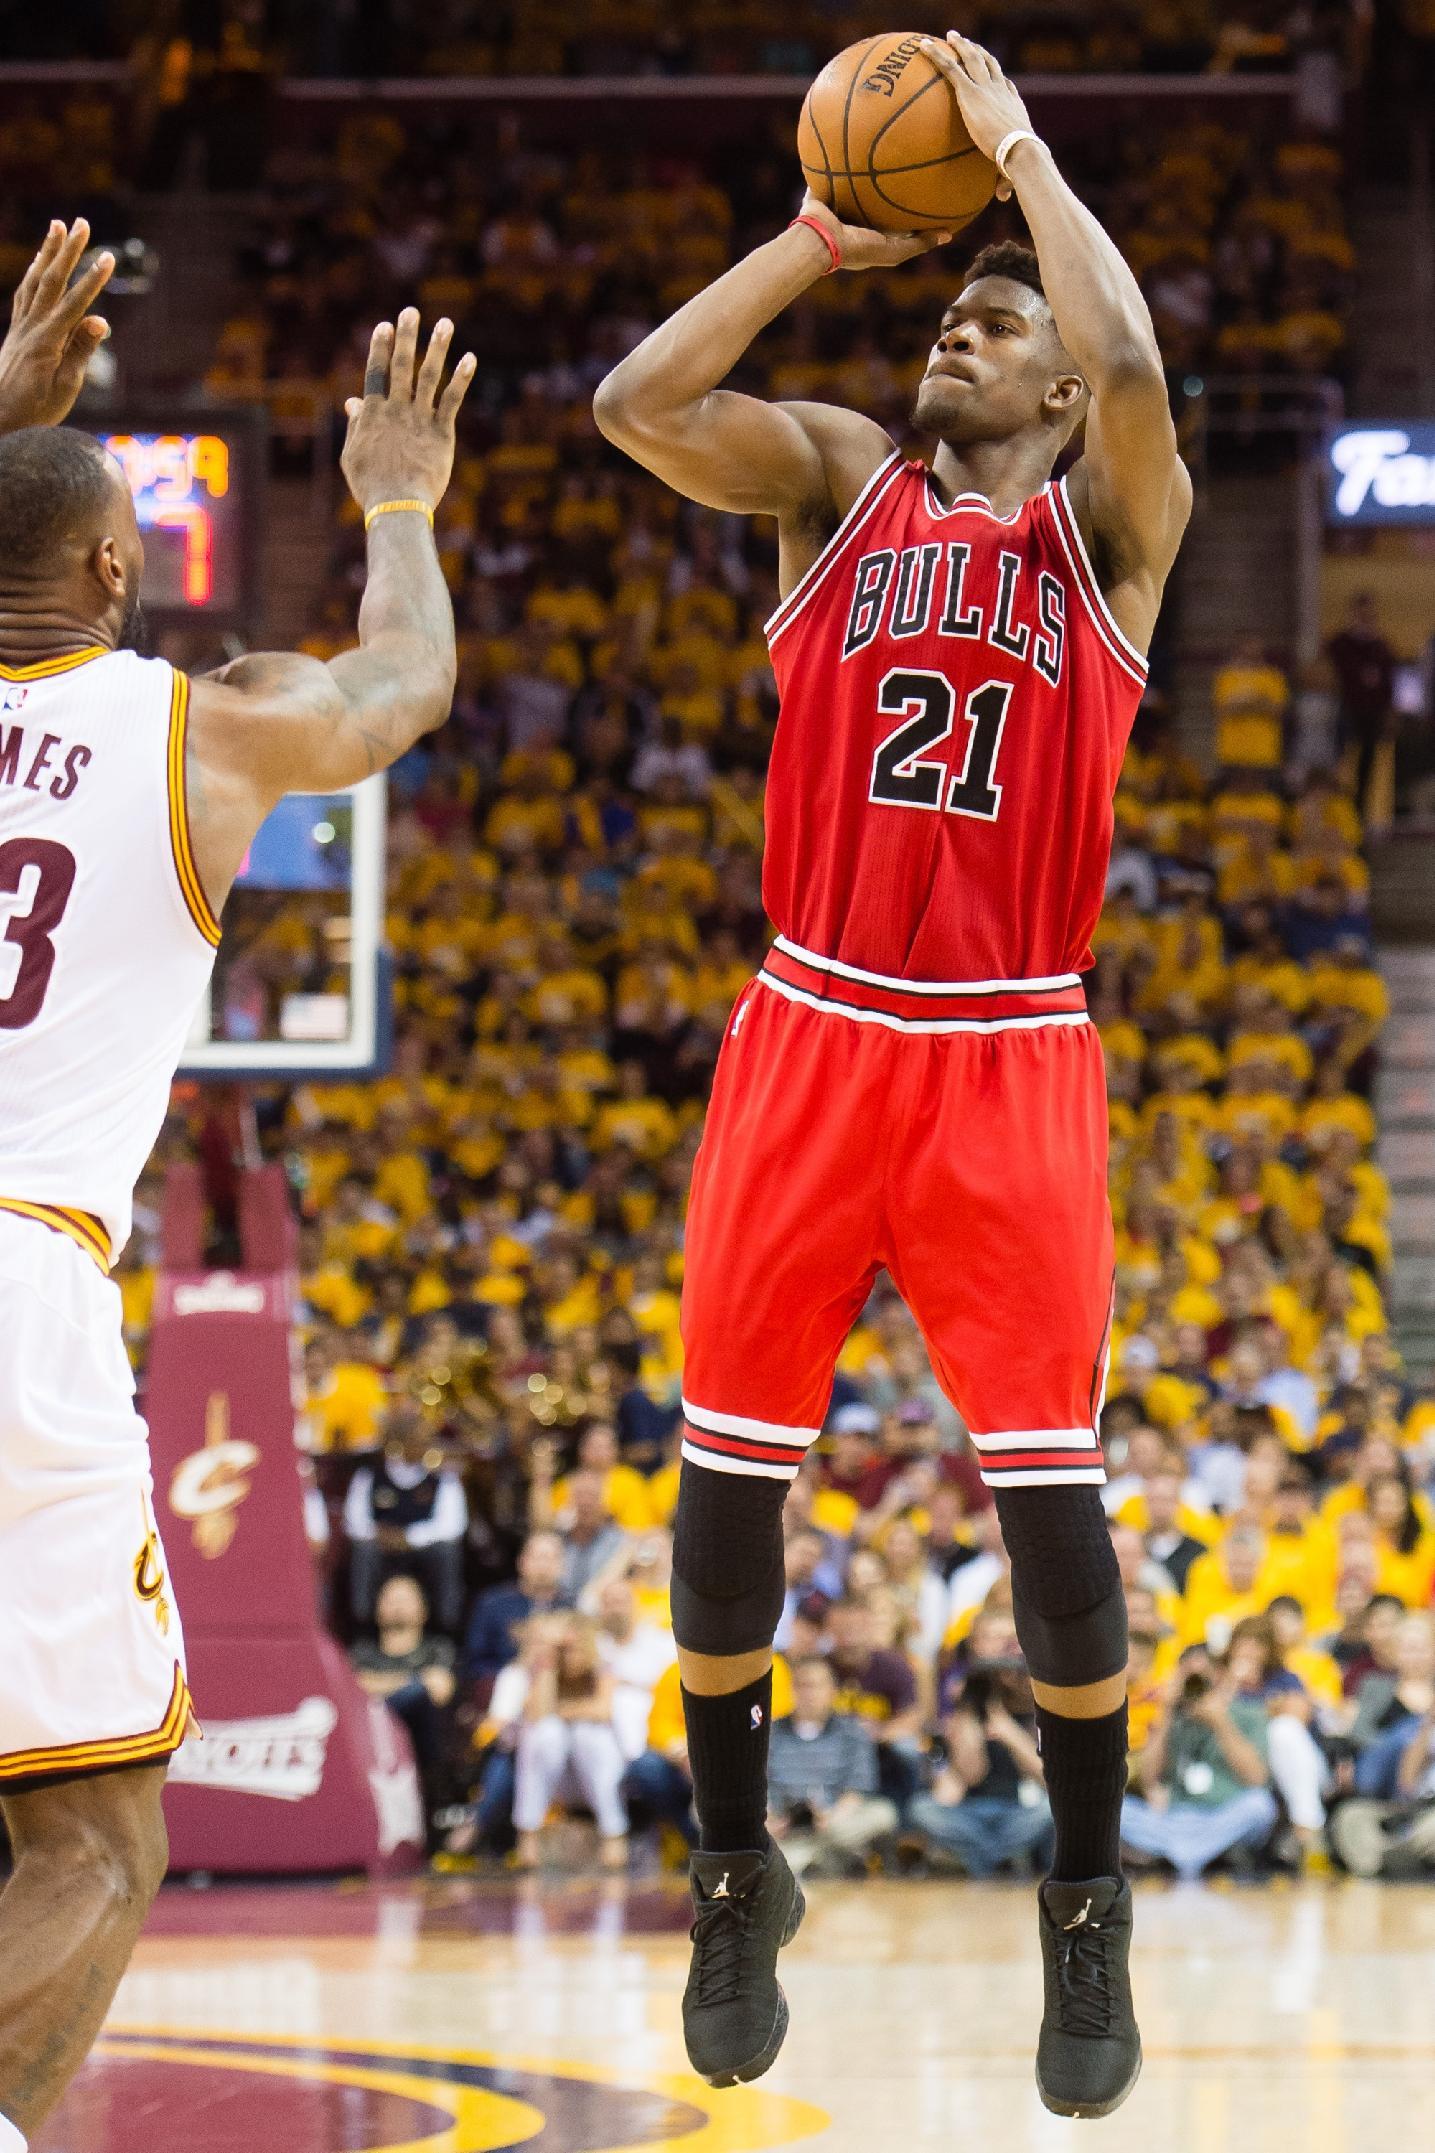 CLEVELAND, OH - MAY 4: Jimmy Butler #21 of the Chicago Bulls shoots over LeBron James #23 of the Cleveland Cavaliers in the second half during Game One in the Eastern Conference Semifinals of the 2015 NBA Playoffs 2015 at Quicken Loans Arena on May 4, 2015 in Cleveland, Ohio. The Bulls defeated the Cavaliers 99-92. NOTE TO USER: User expressly acknowledges and agrees that, by downloading and or using this photograph, User is consenting to the terms and conditions of the Getty Images License Agreement. (Photo by Jason Miller/Getty Images)